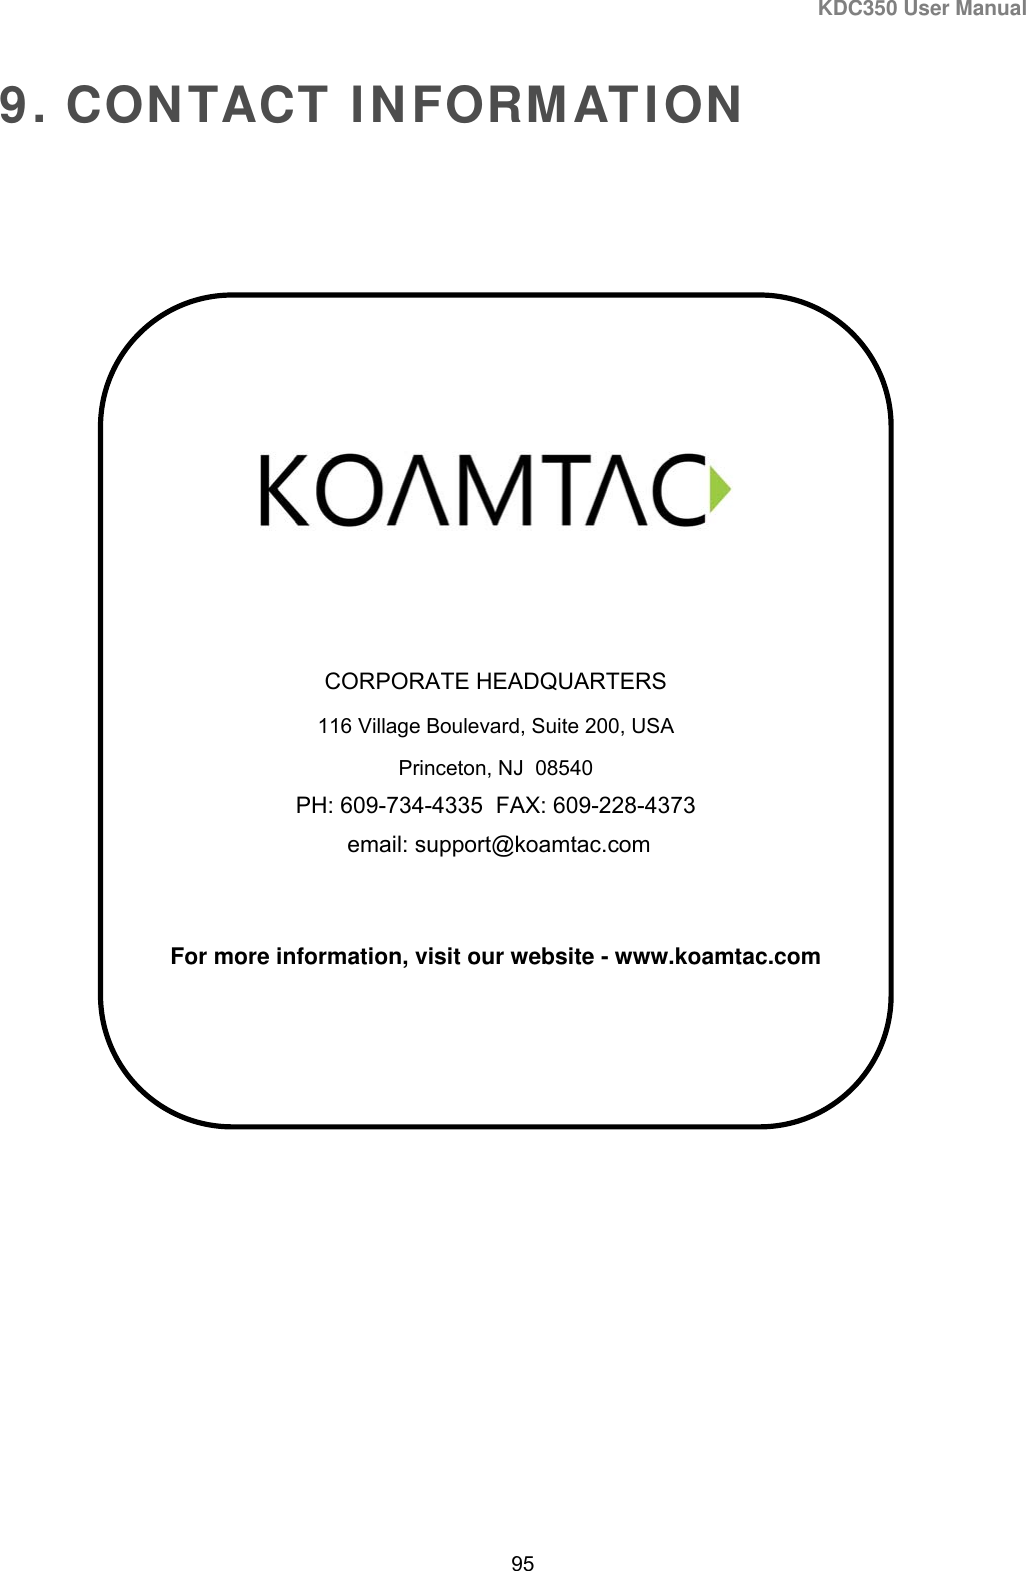 KDC350 User Manual  95  9. CONTACT INFORMATION        CORPORATE HEADQUARTERS 116 Village Boulevard, Suite 200, USA Princeton, NJ  08540 PH: 609-734-4335  FAX: 609-228-4373  email: support@koamtac.com   For more information, visit our website - www.koamtac.com  